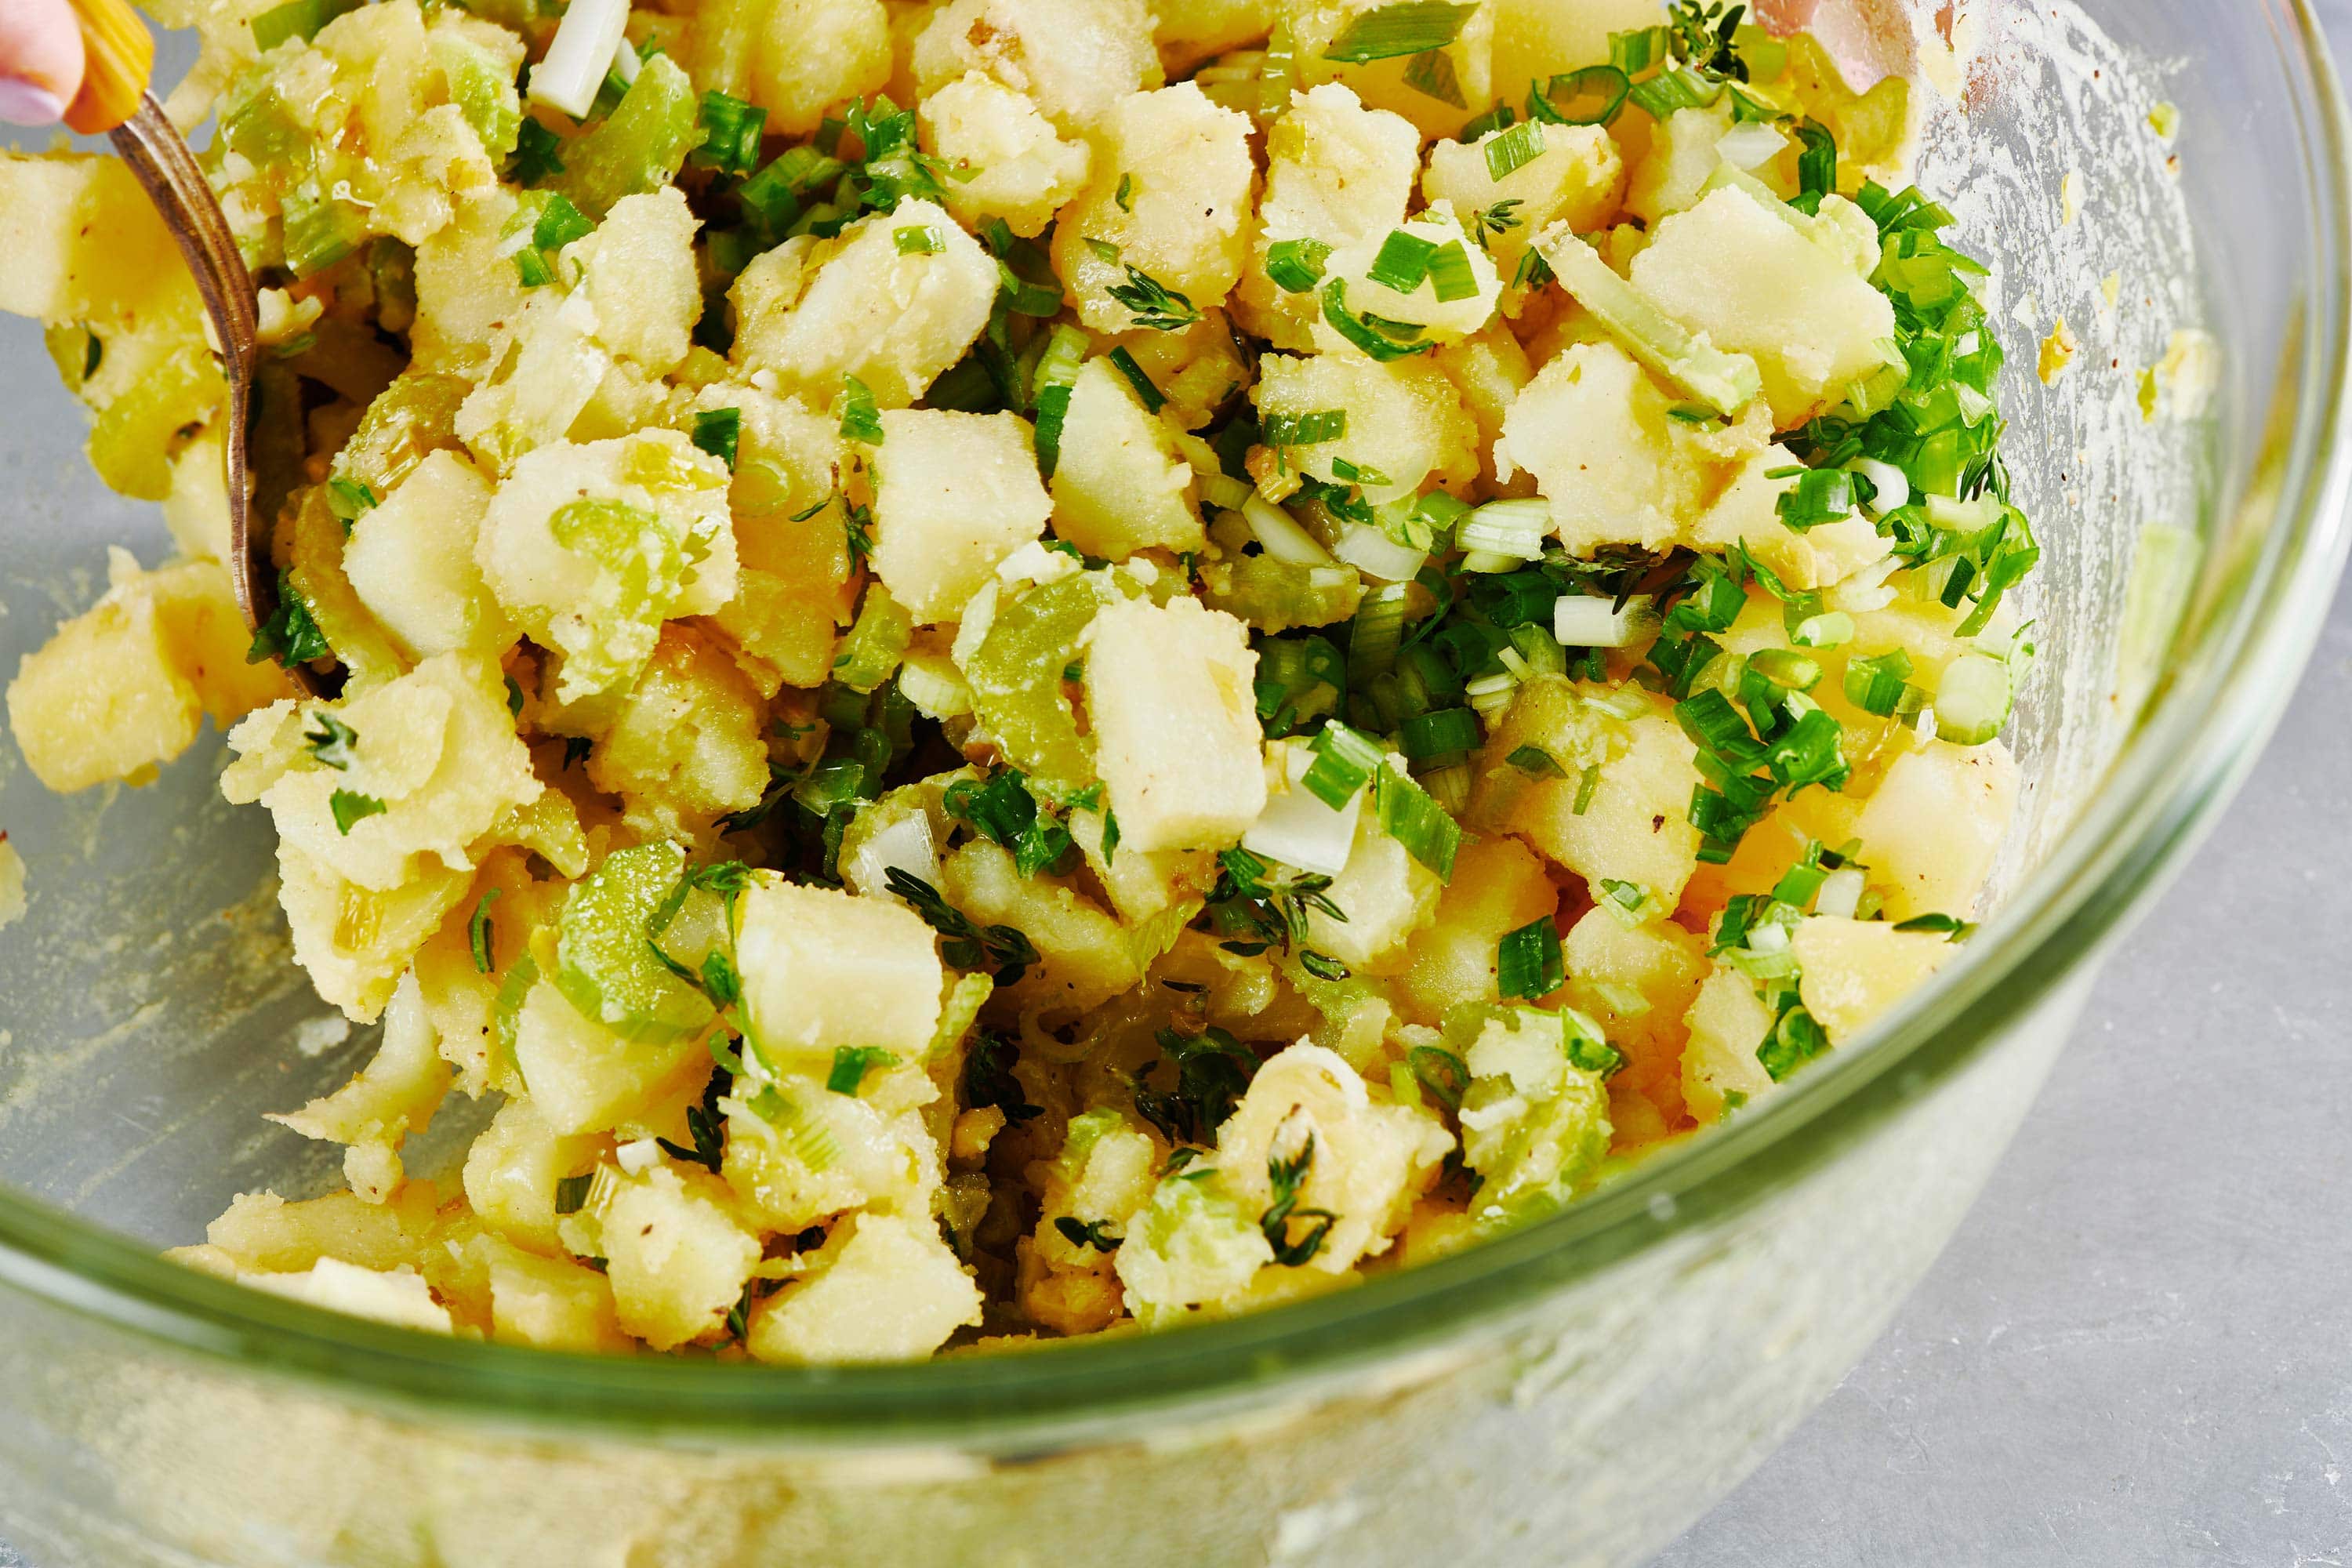 Mixing Vegan Potato Salad with thyme and scallions in glass bowl.